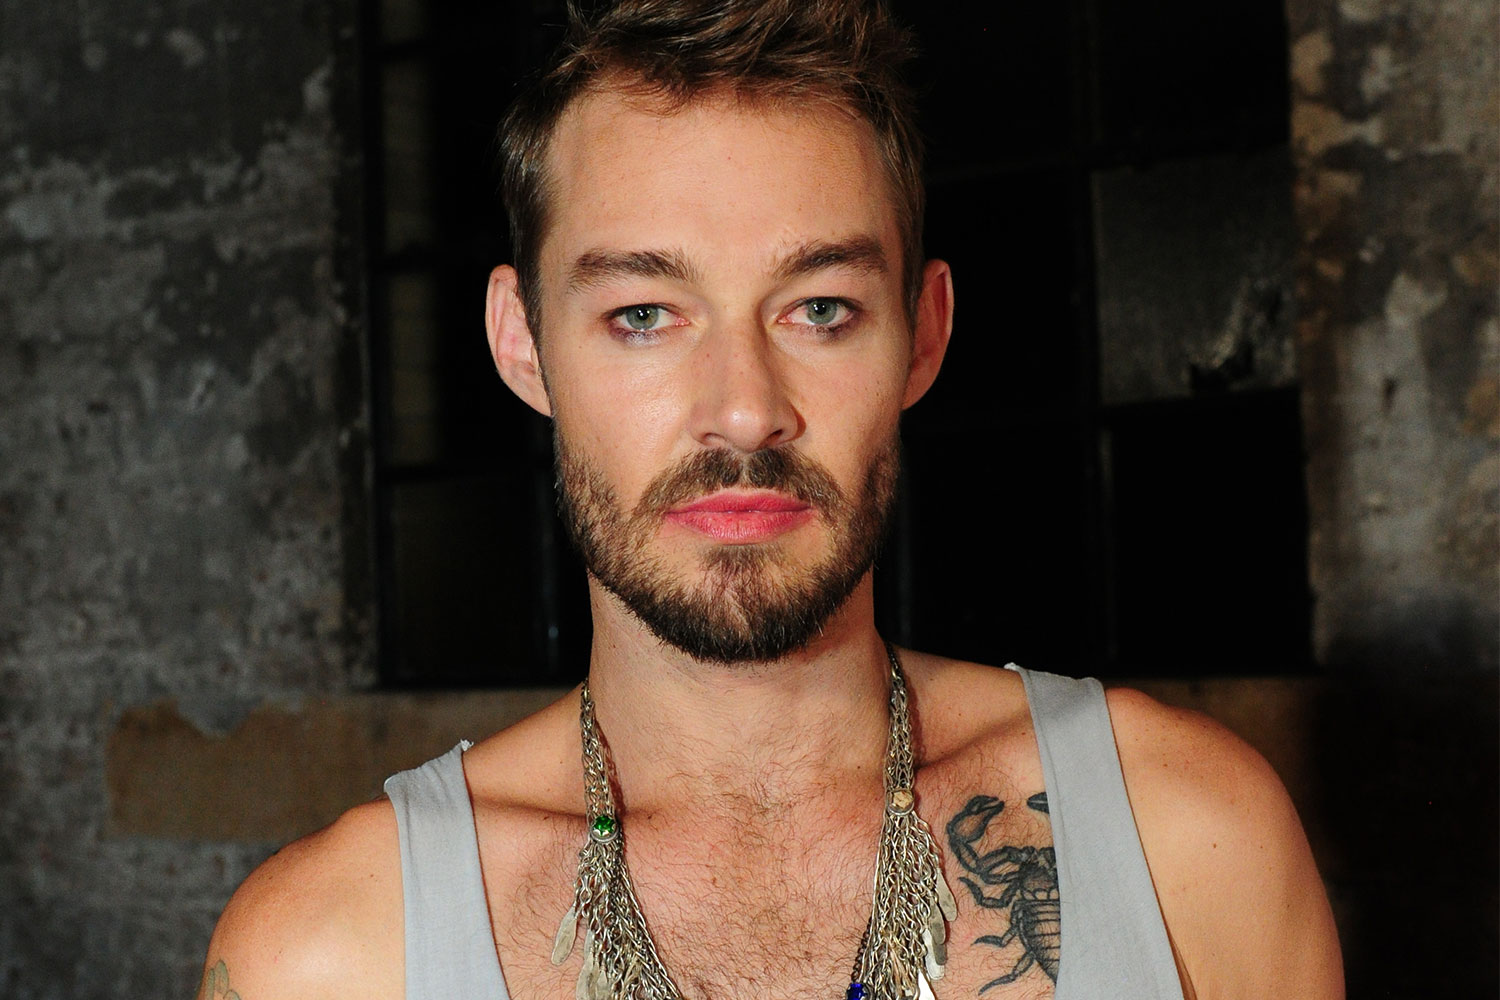 19 Extraordinary Facts About Daniel Johns - Facts.net